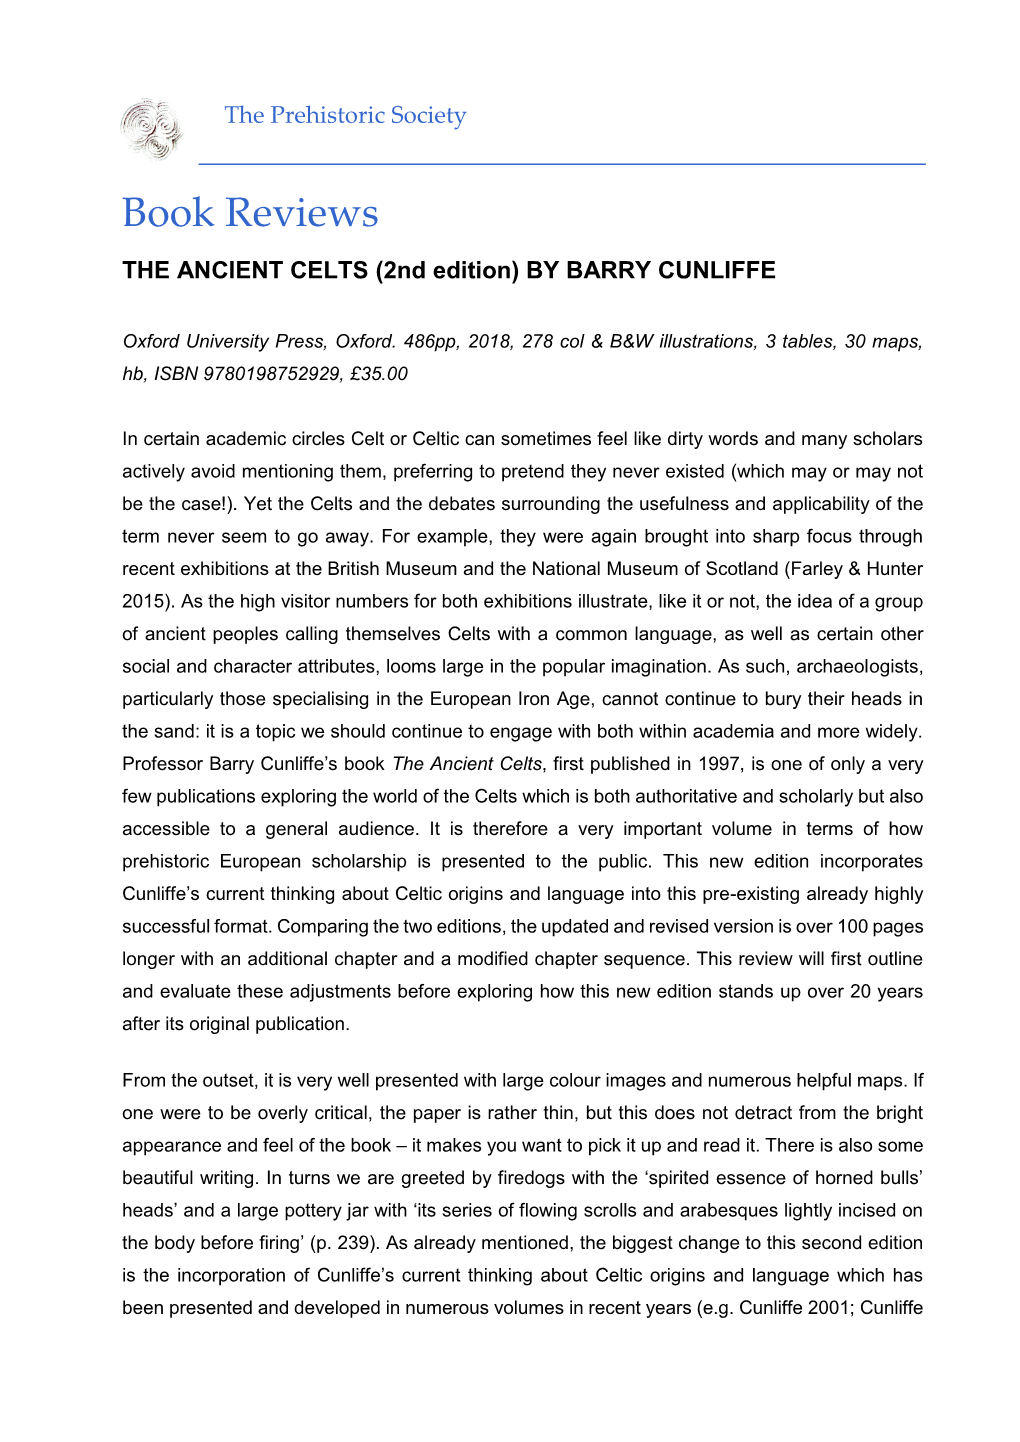 THE ANCIENT CELTS (2Nd Edition) by BARRY CUNLIFFE